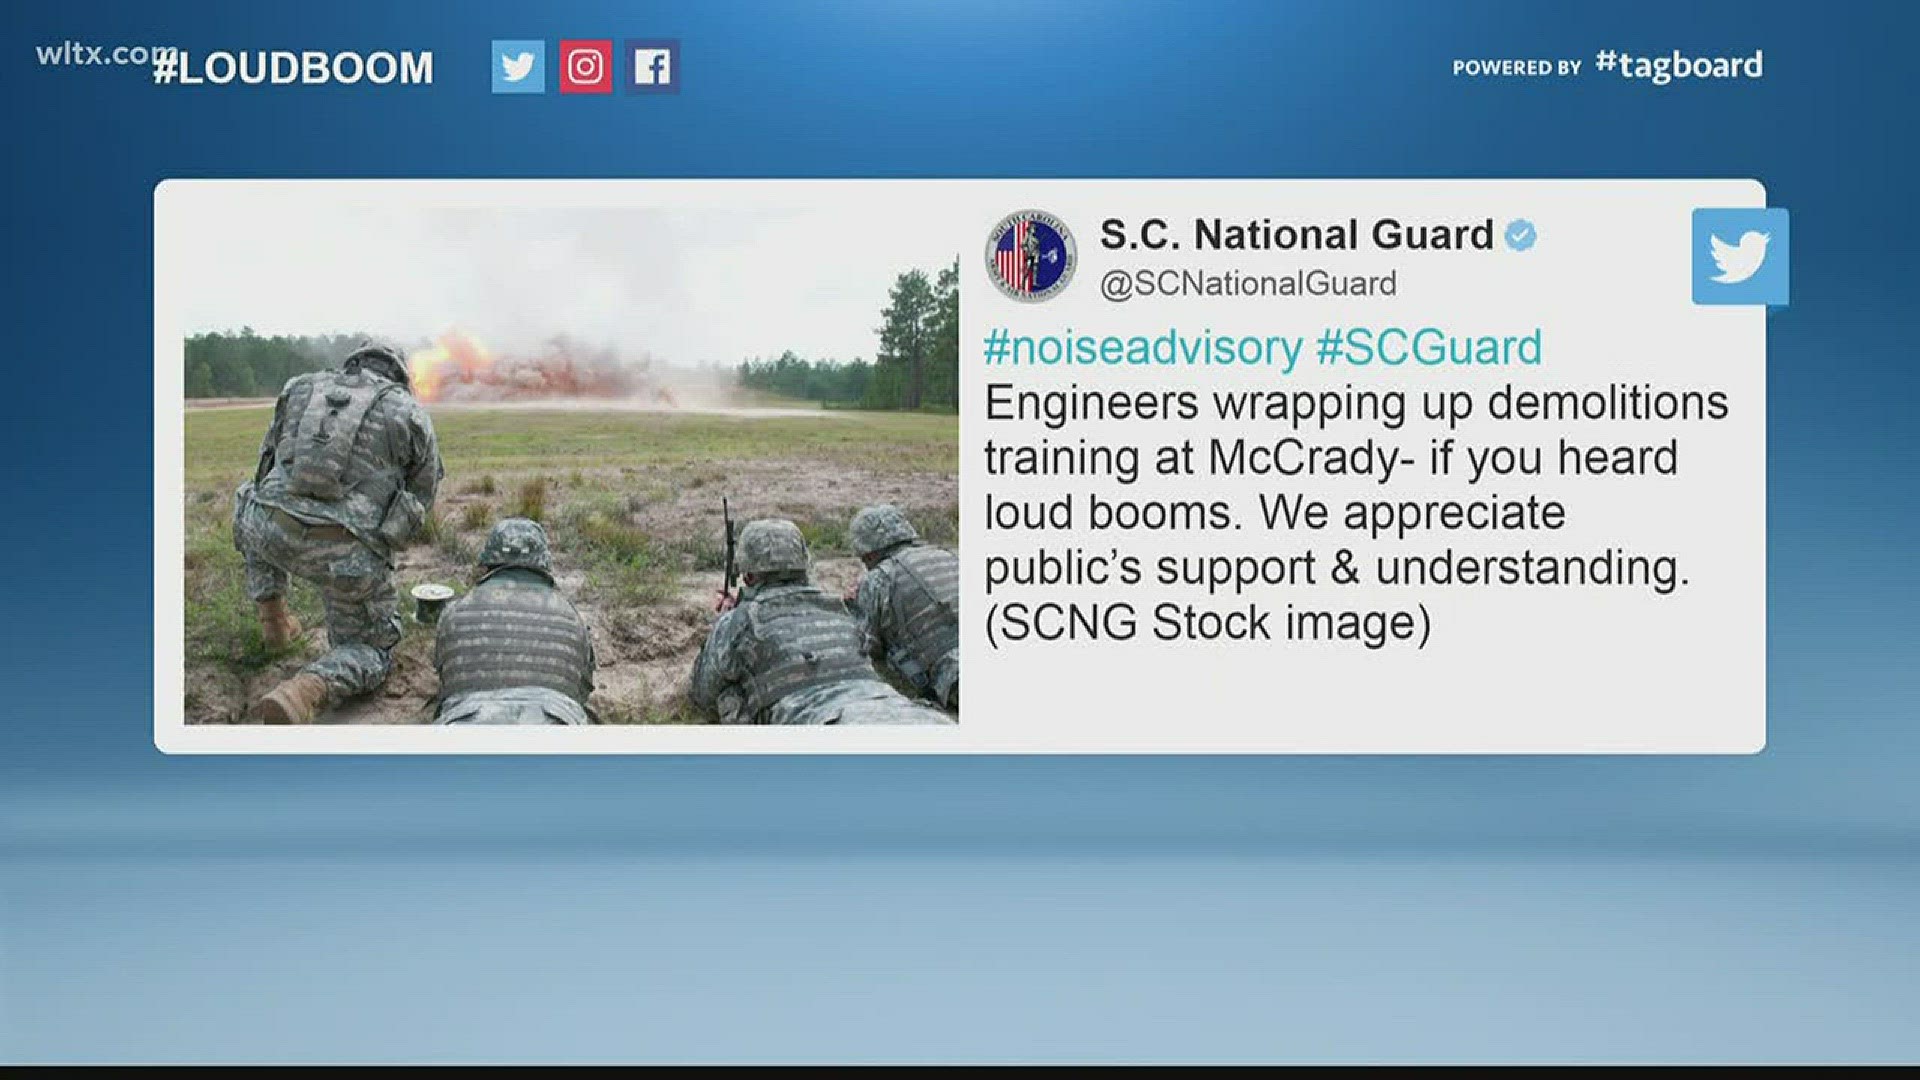 A training exercise by the South Carolina National Guard caused some loud booms around Columbia on Sunday.